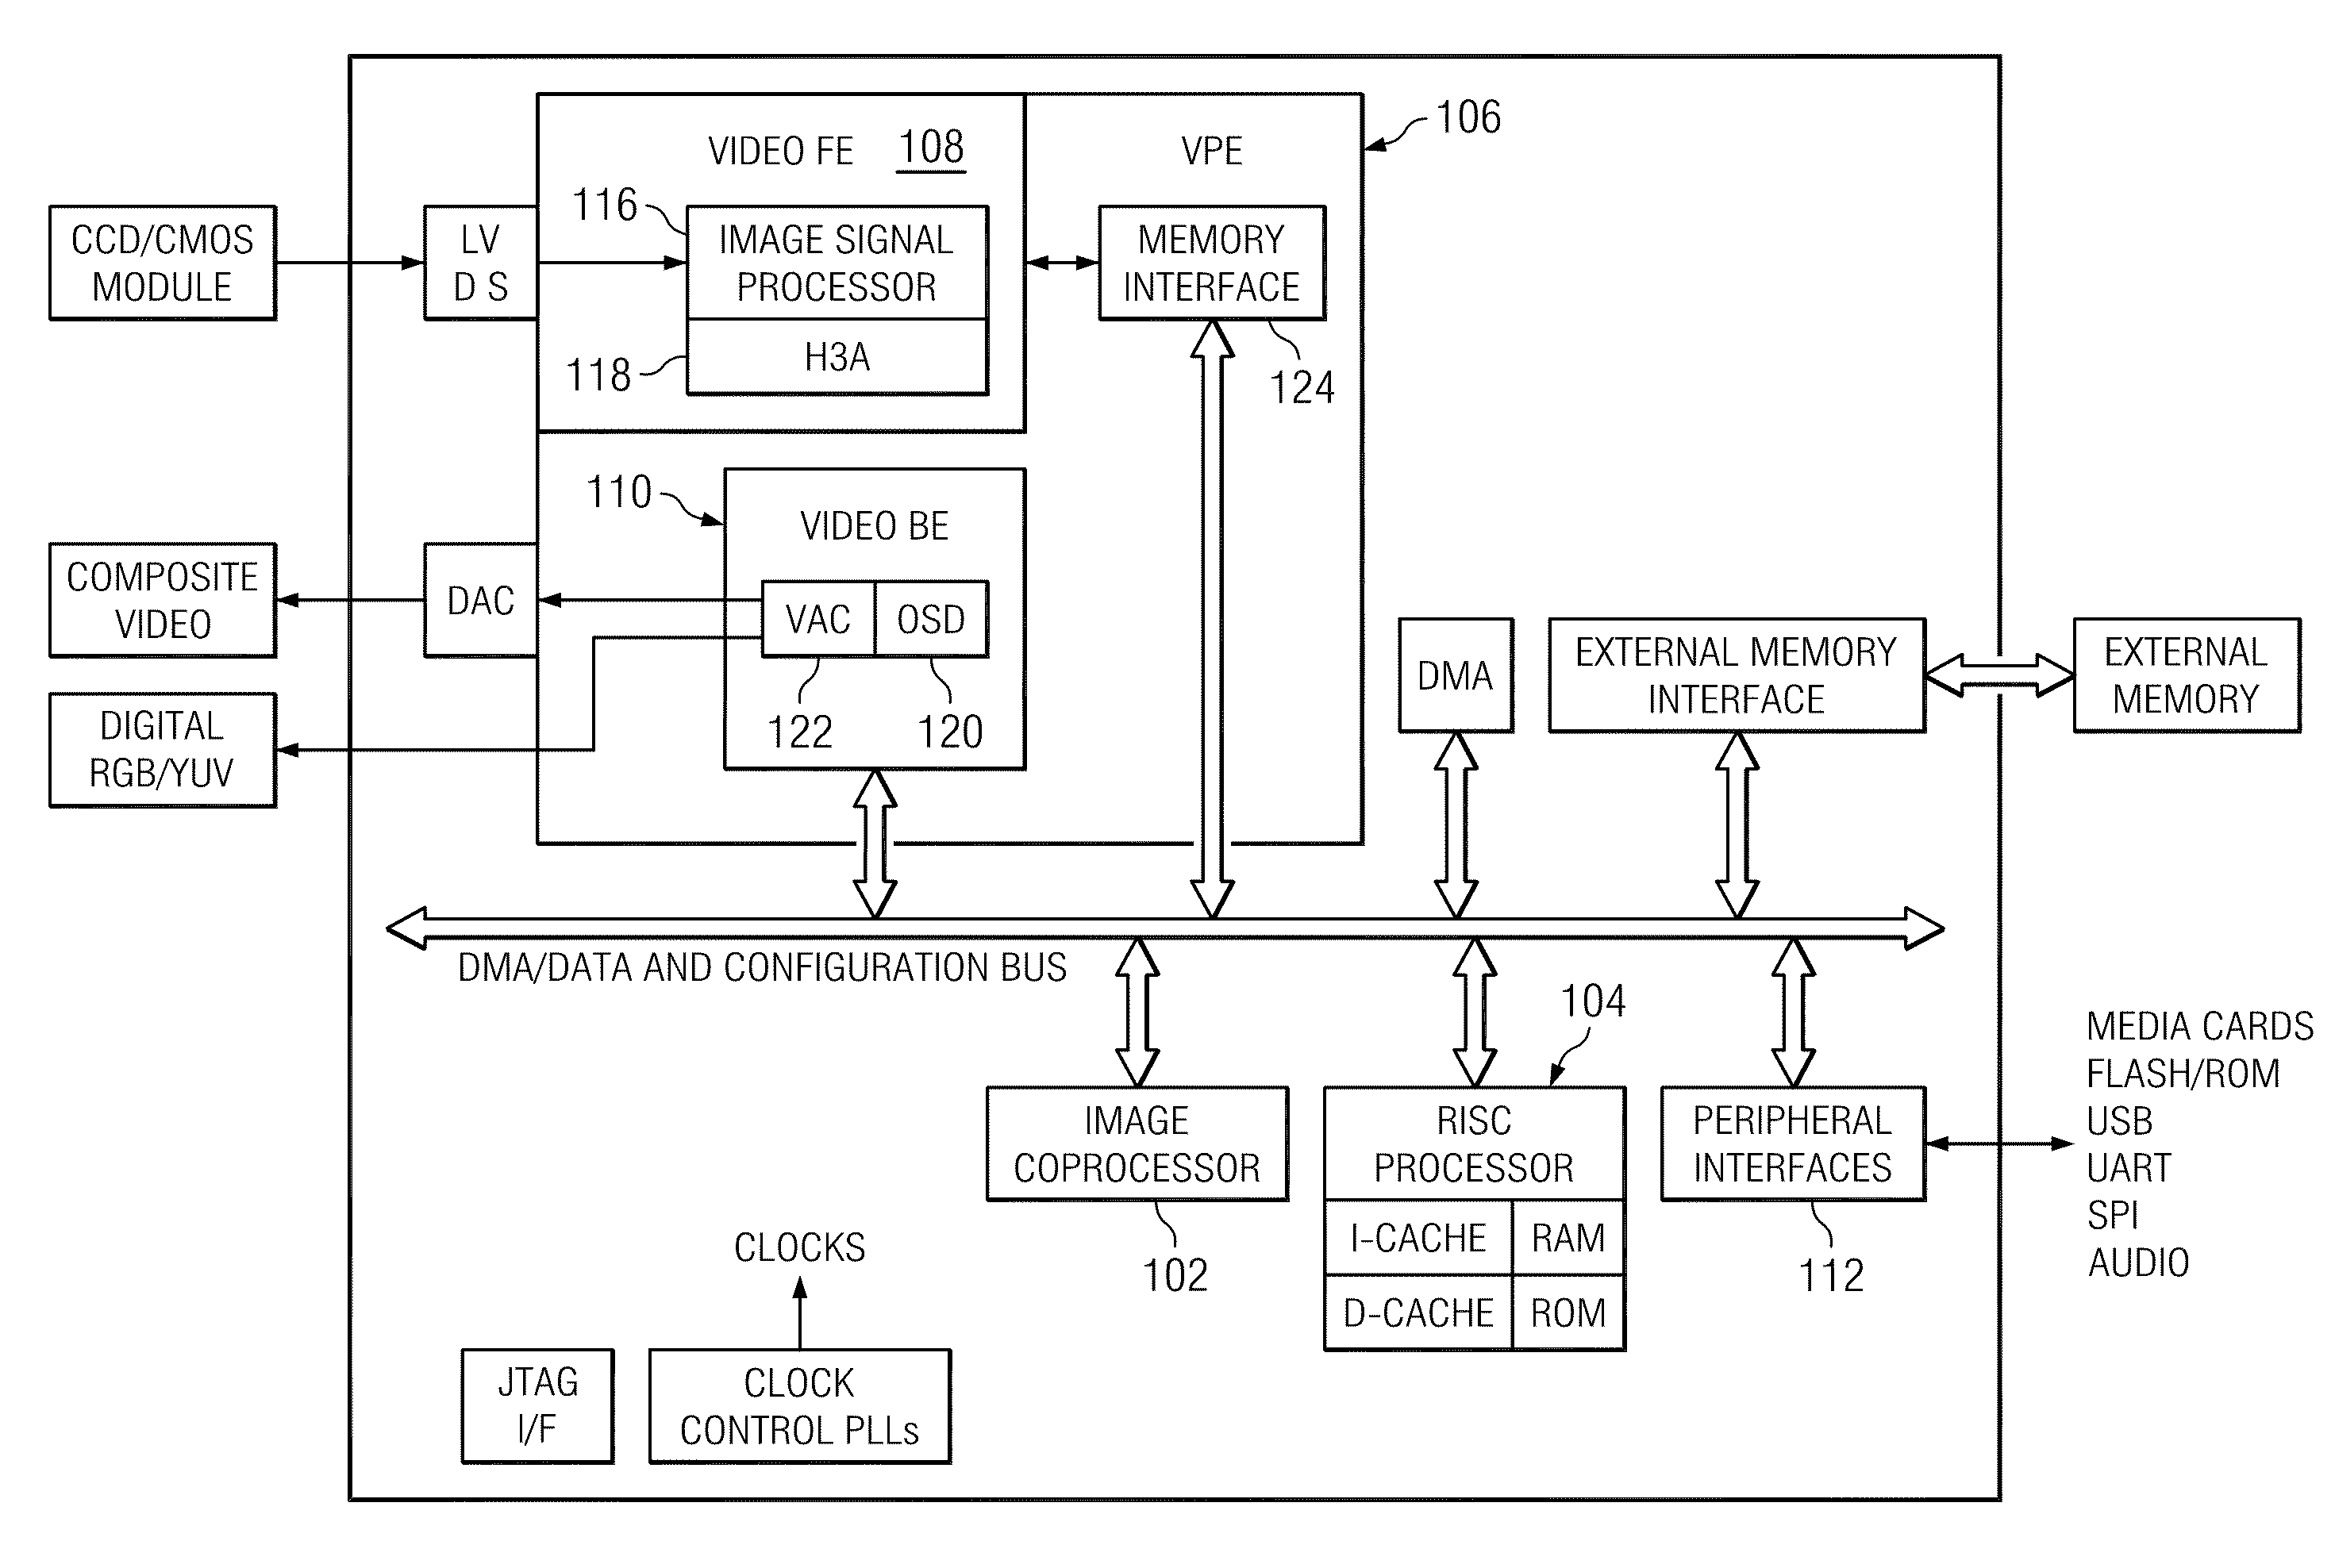 Methods and Systems for Automatic White Balance